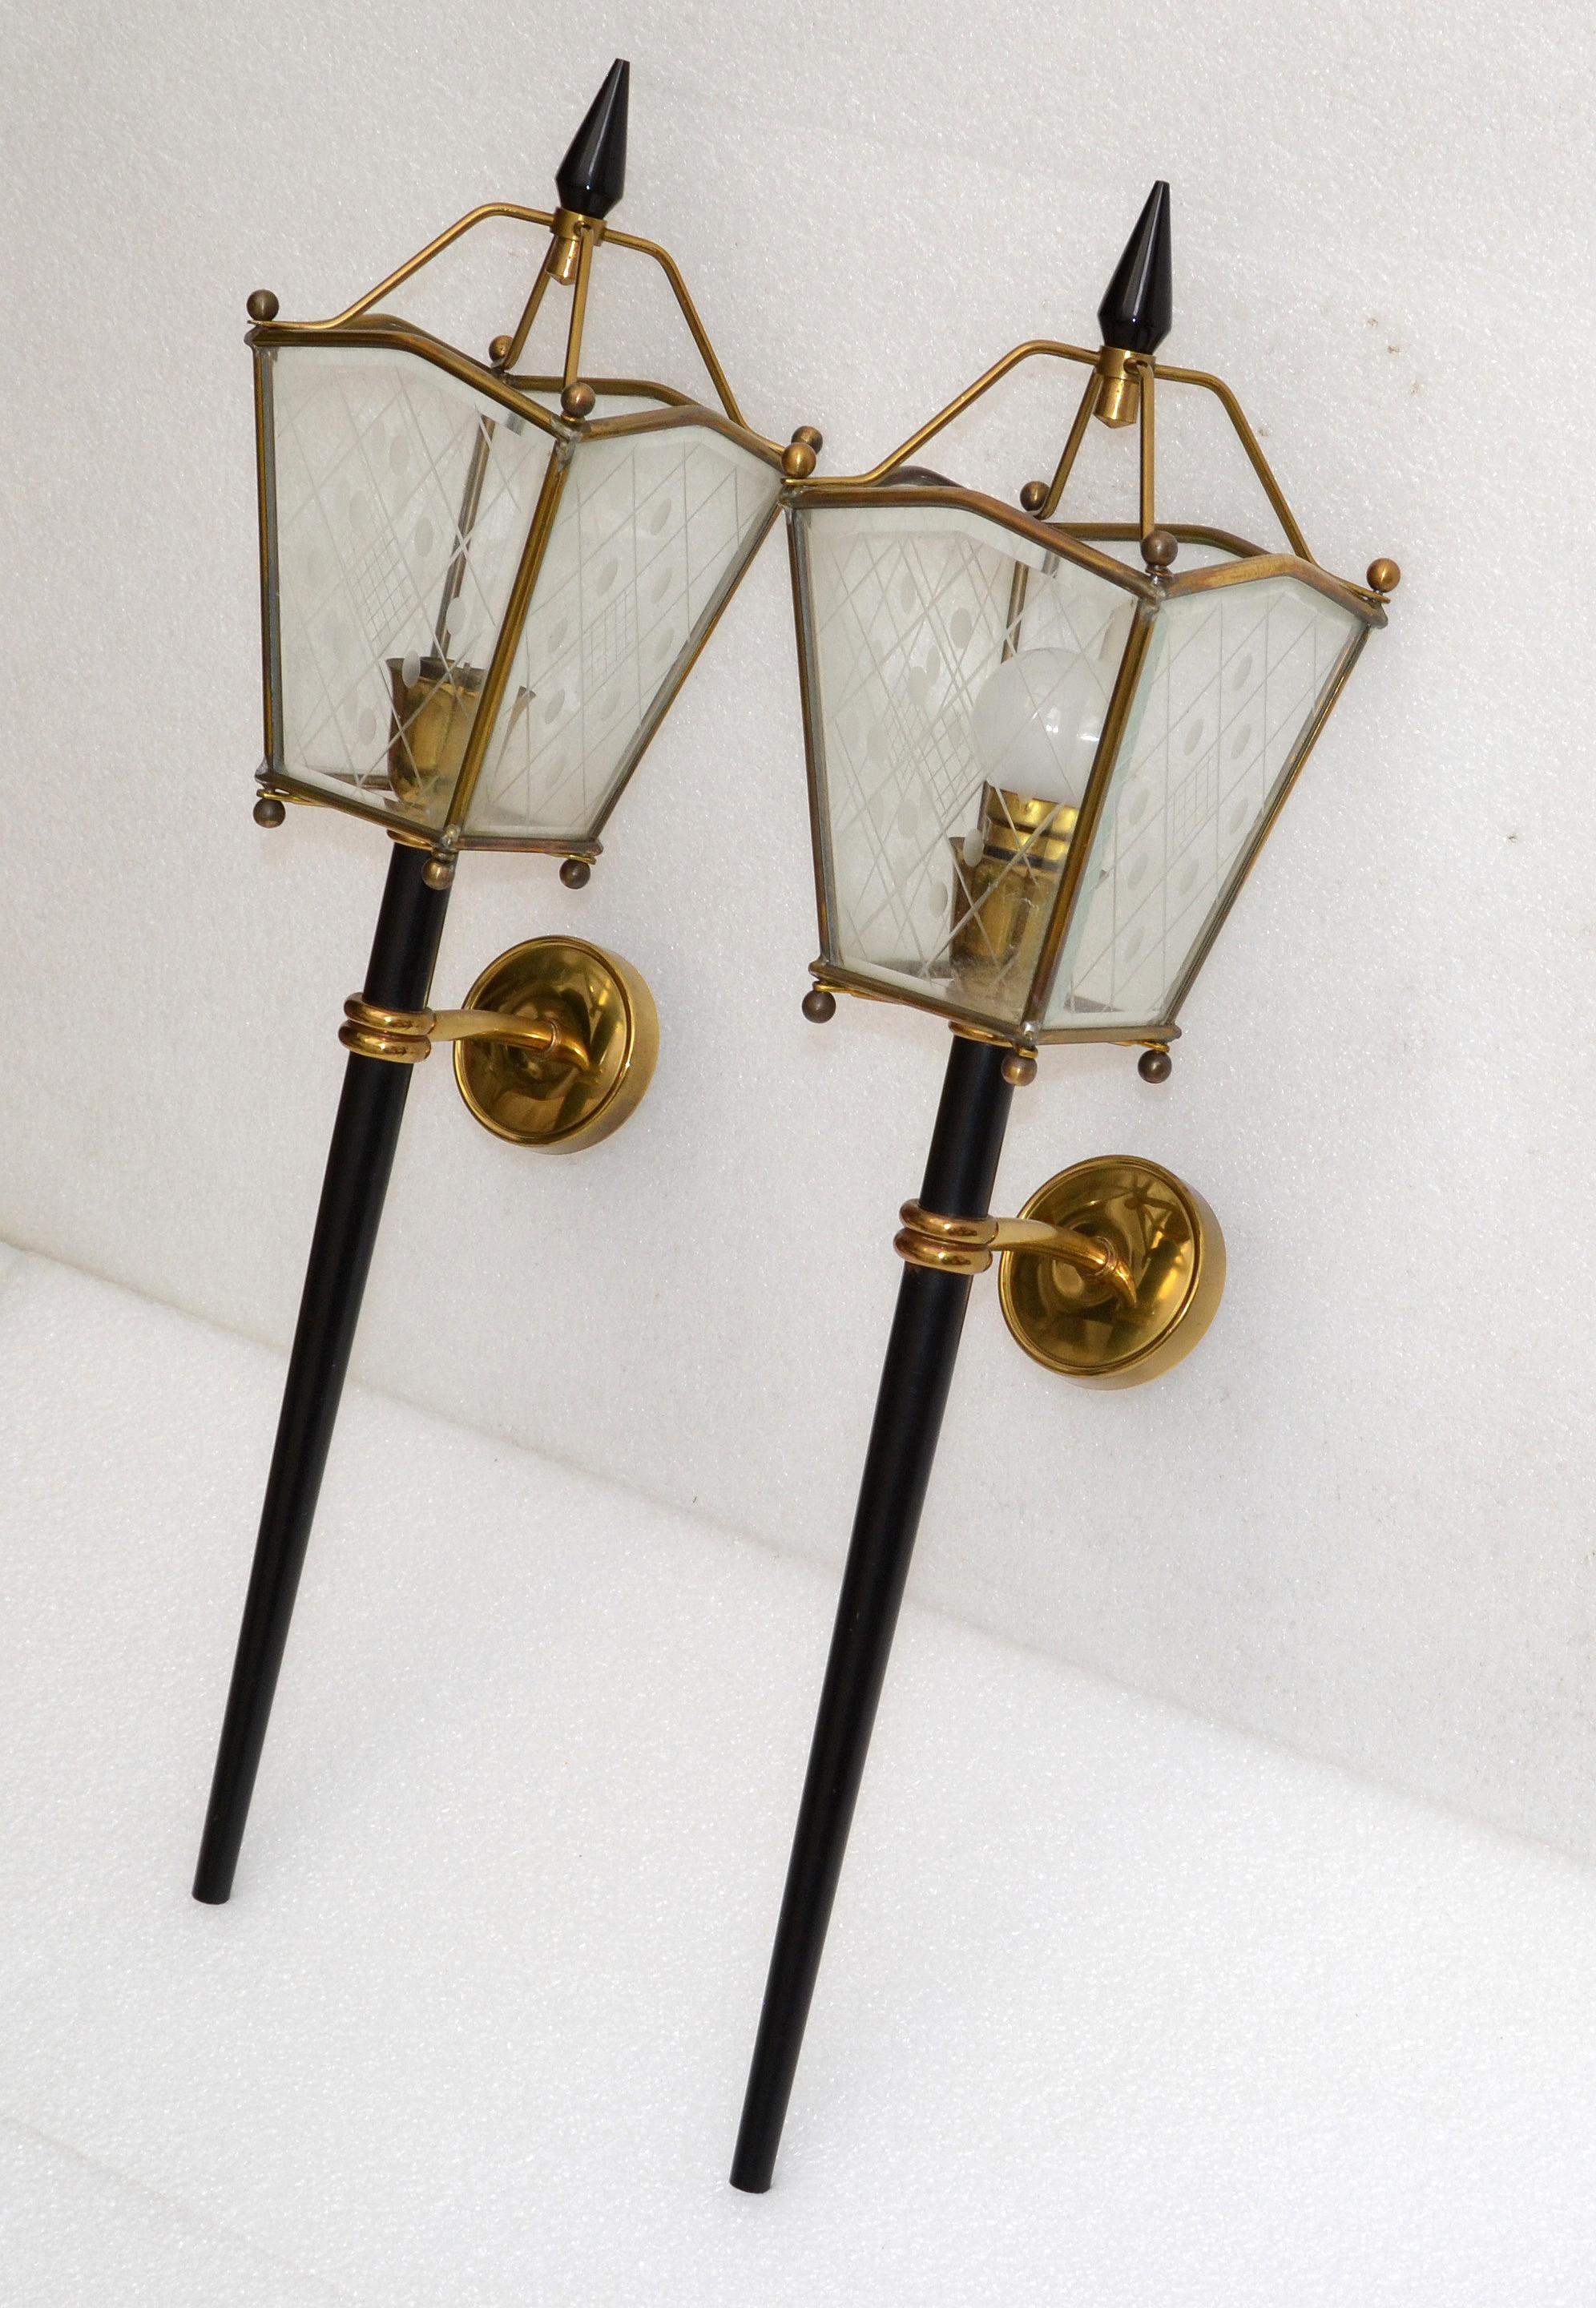 Mid-20th Century Jacques Adnet Style Sconces Lantern Wall Lamps French Mid-Century Modern, Pair